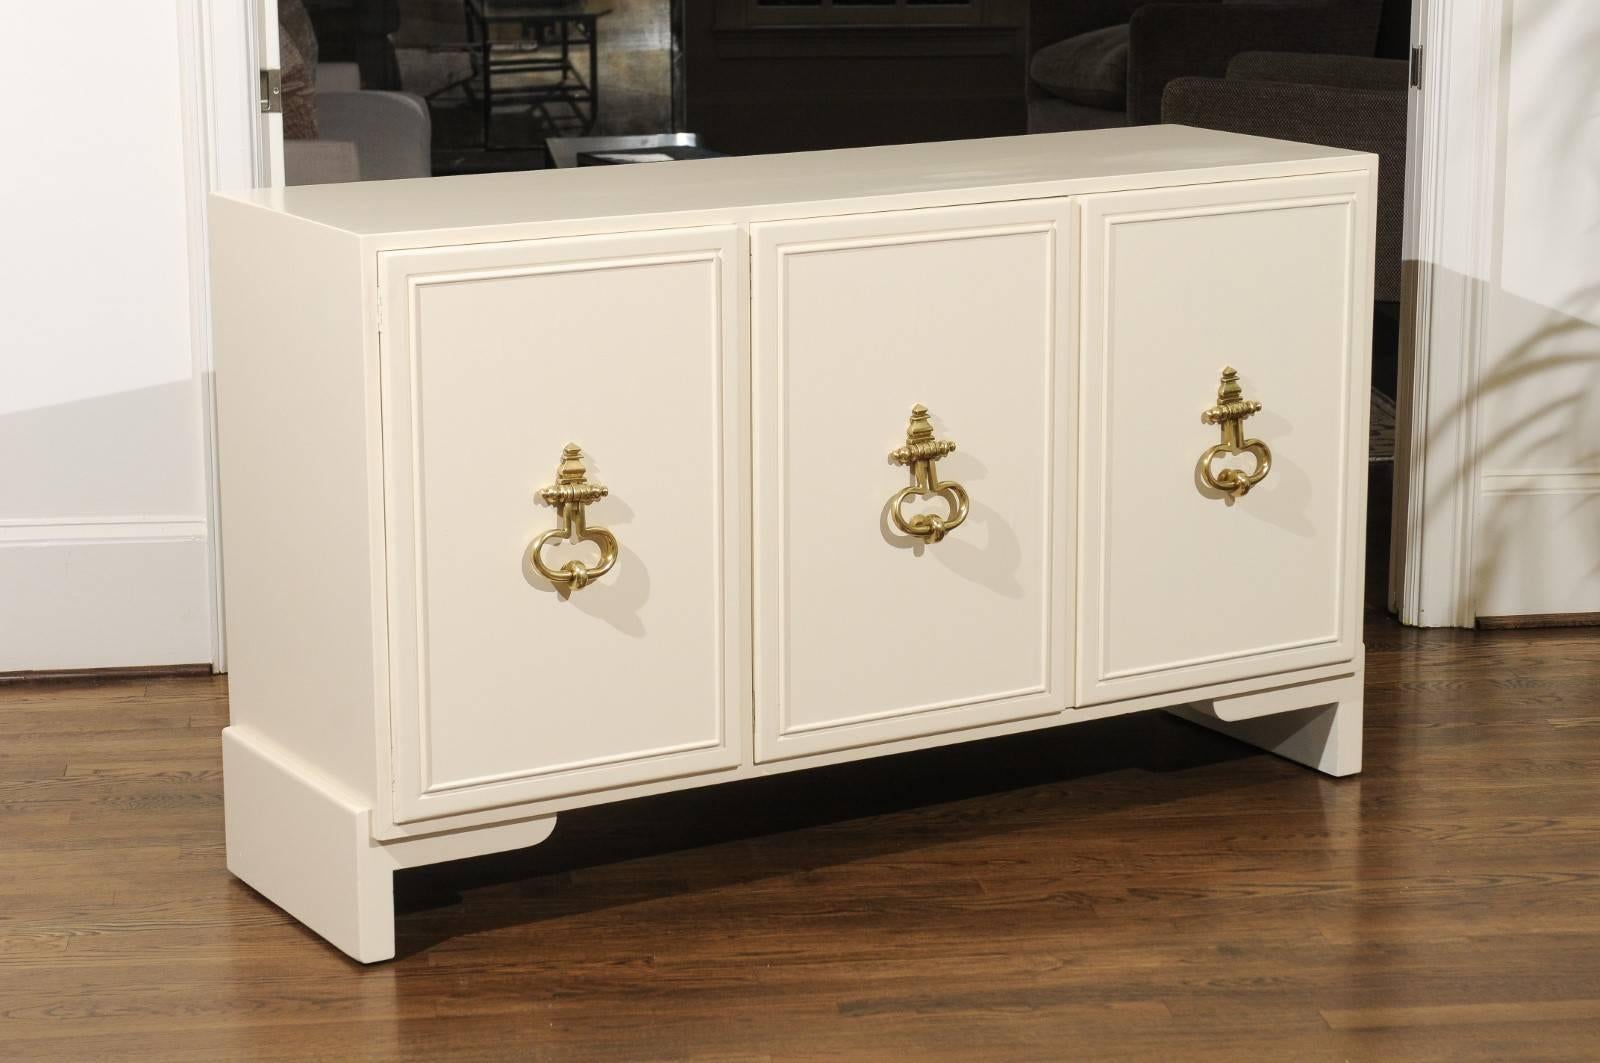 Fabulous Restored Parzinger Style Cabinet in Cream Lacquer, circa 1975 For Sale 2